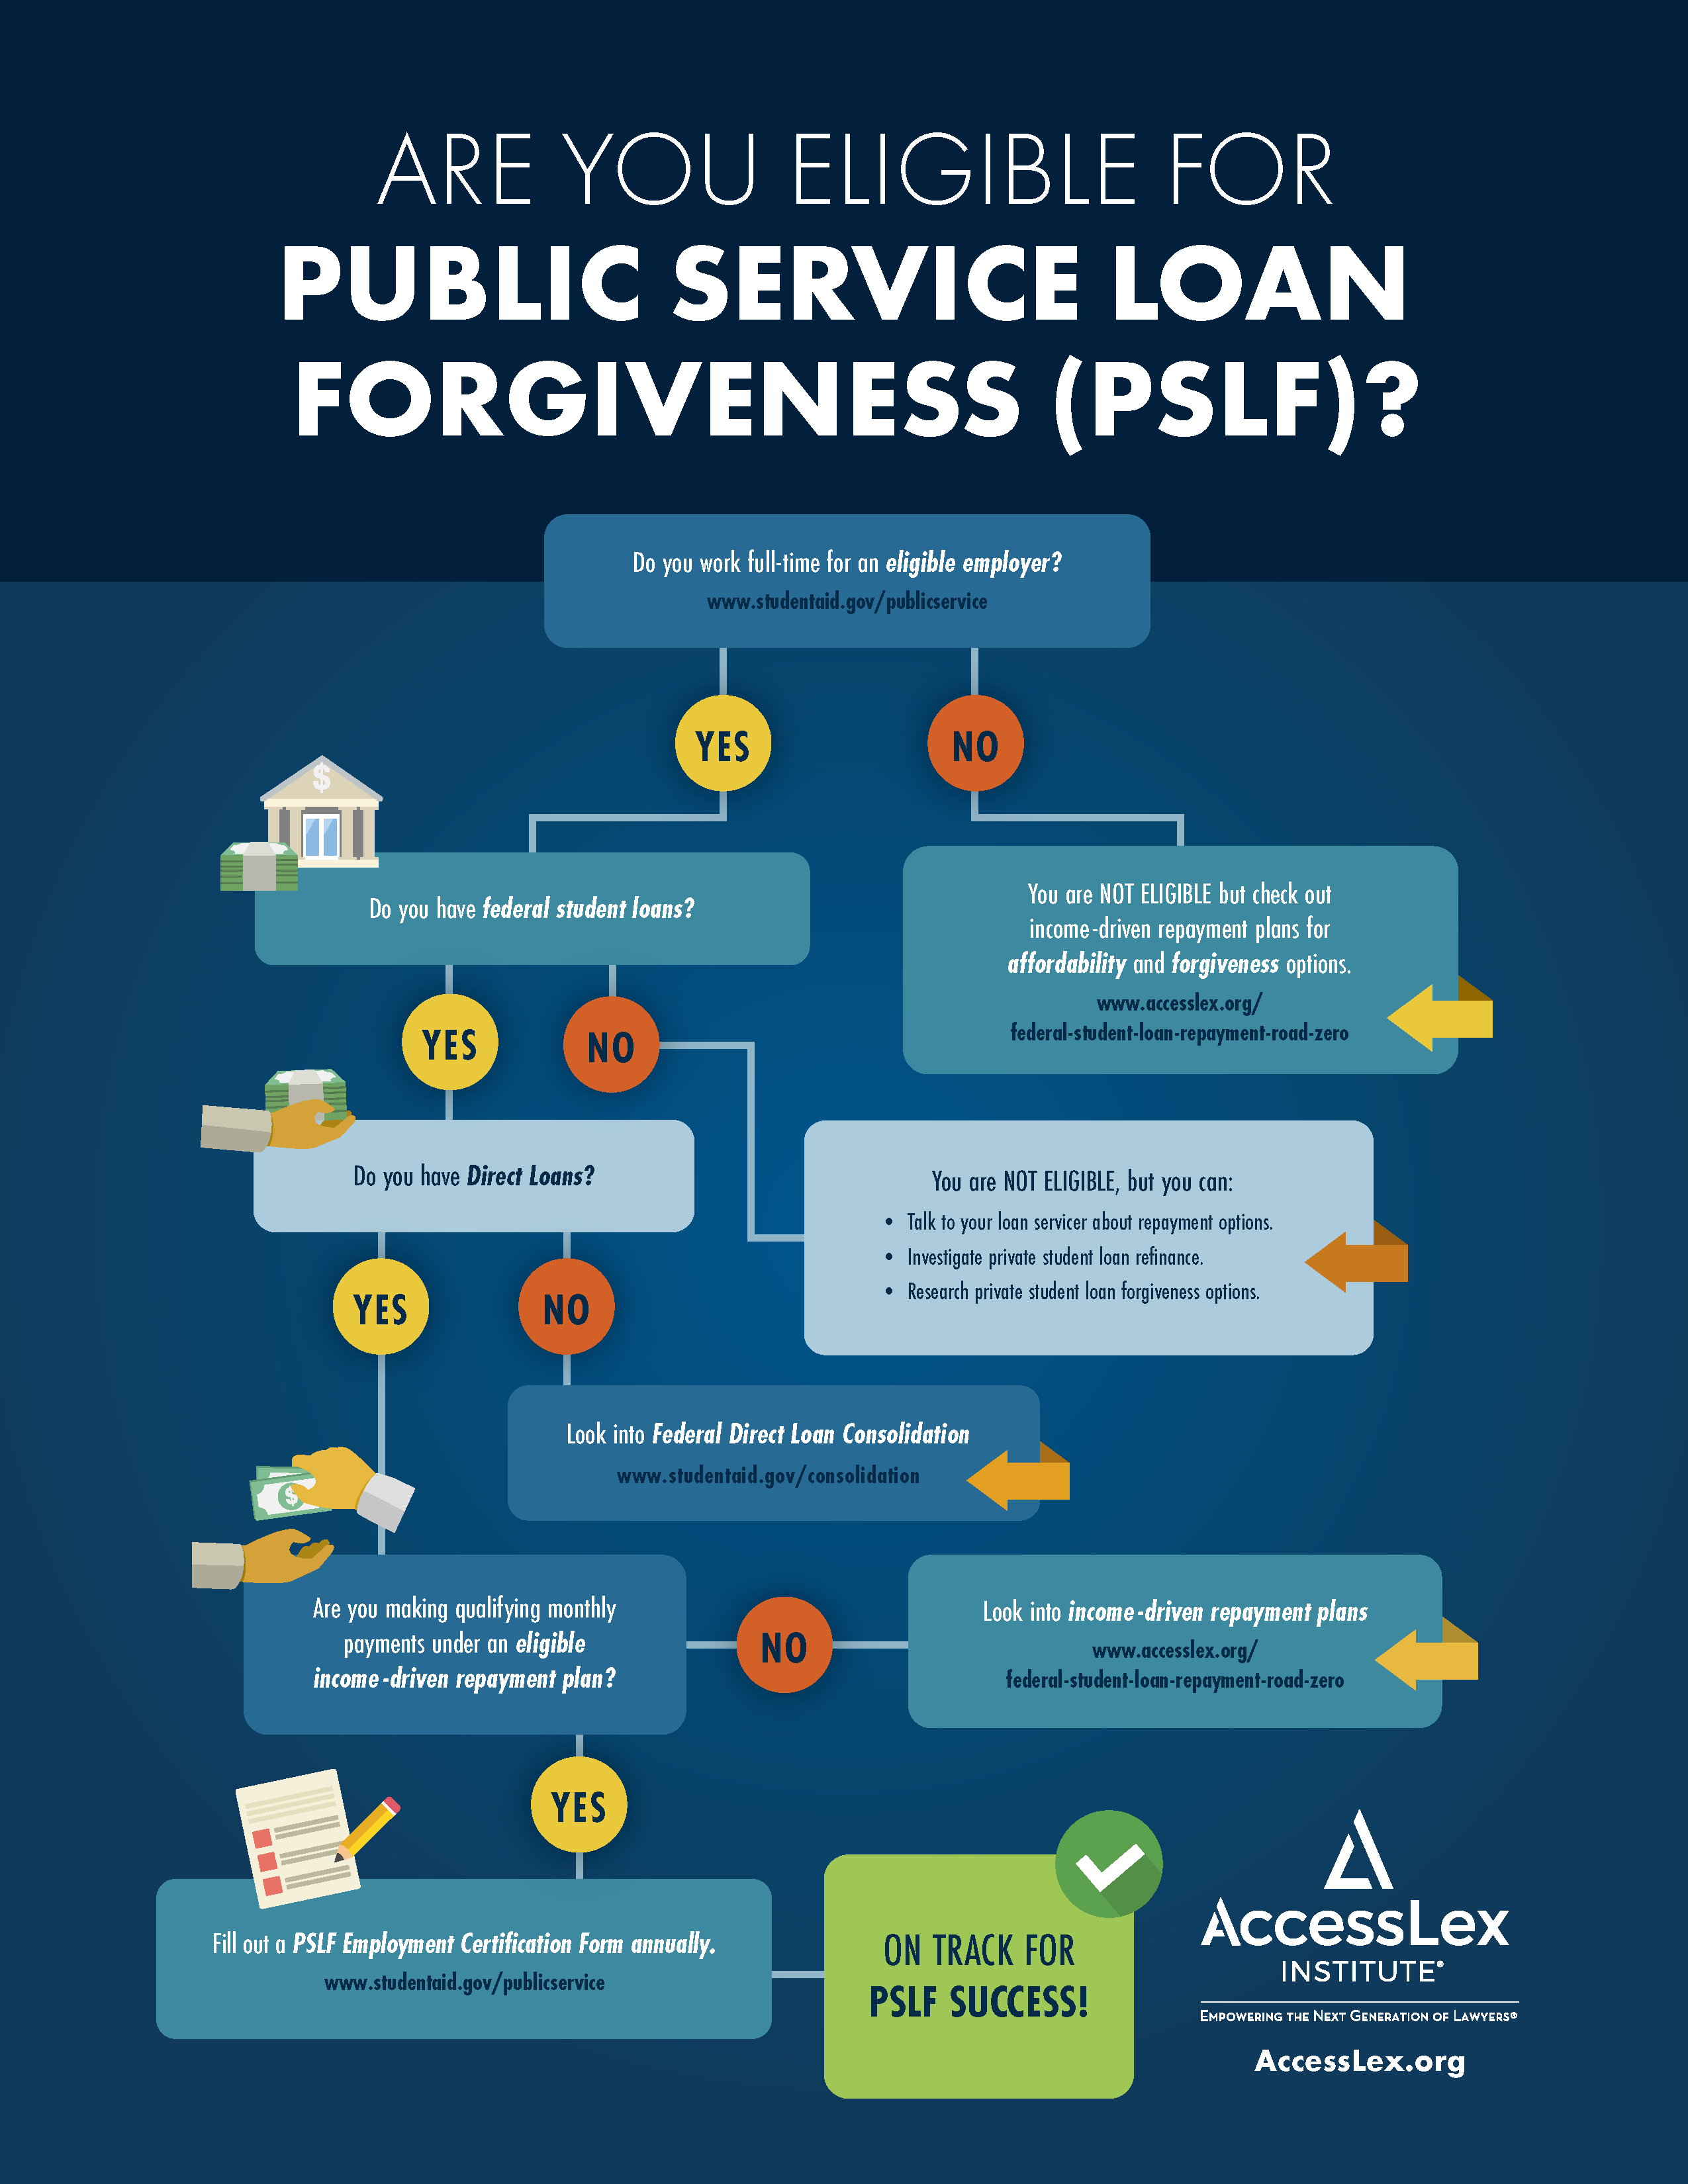 Are you eligible for PSLF?